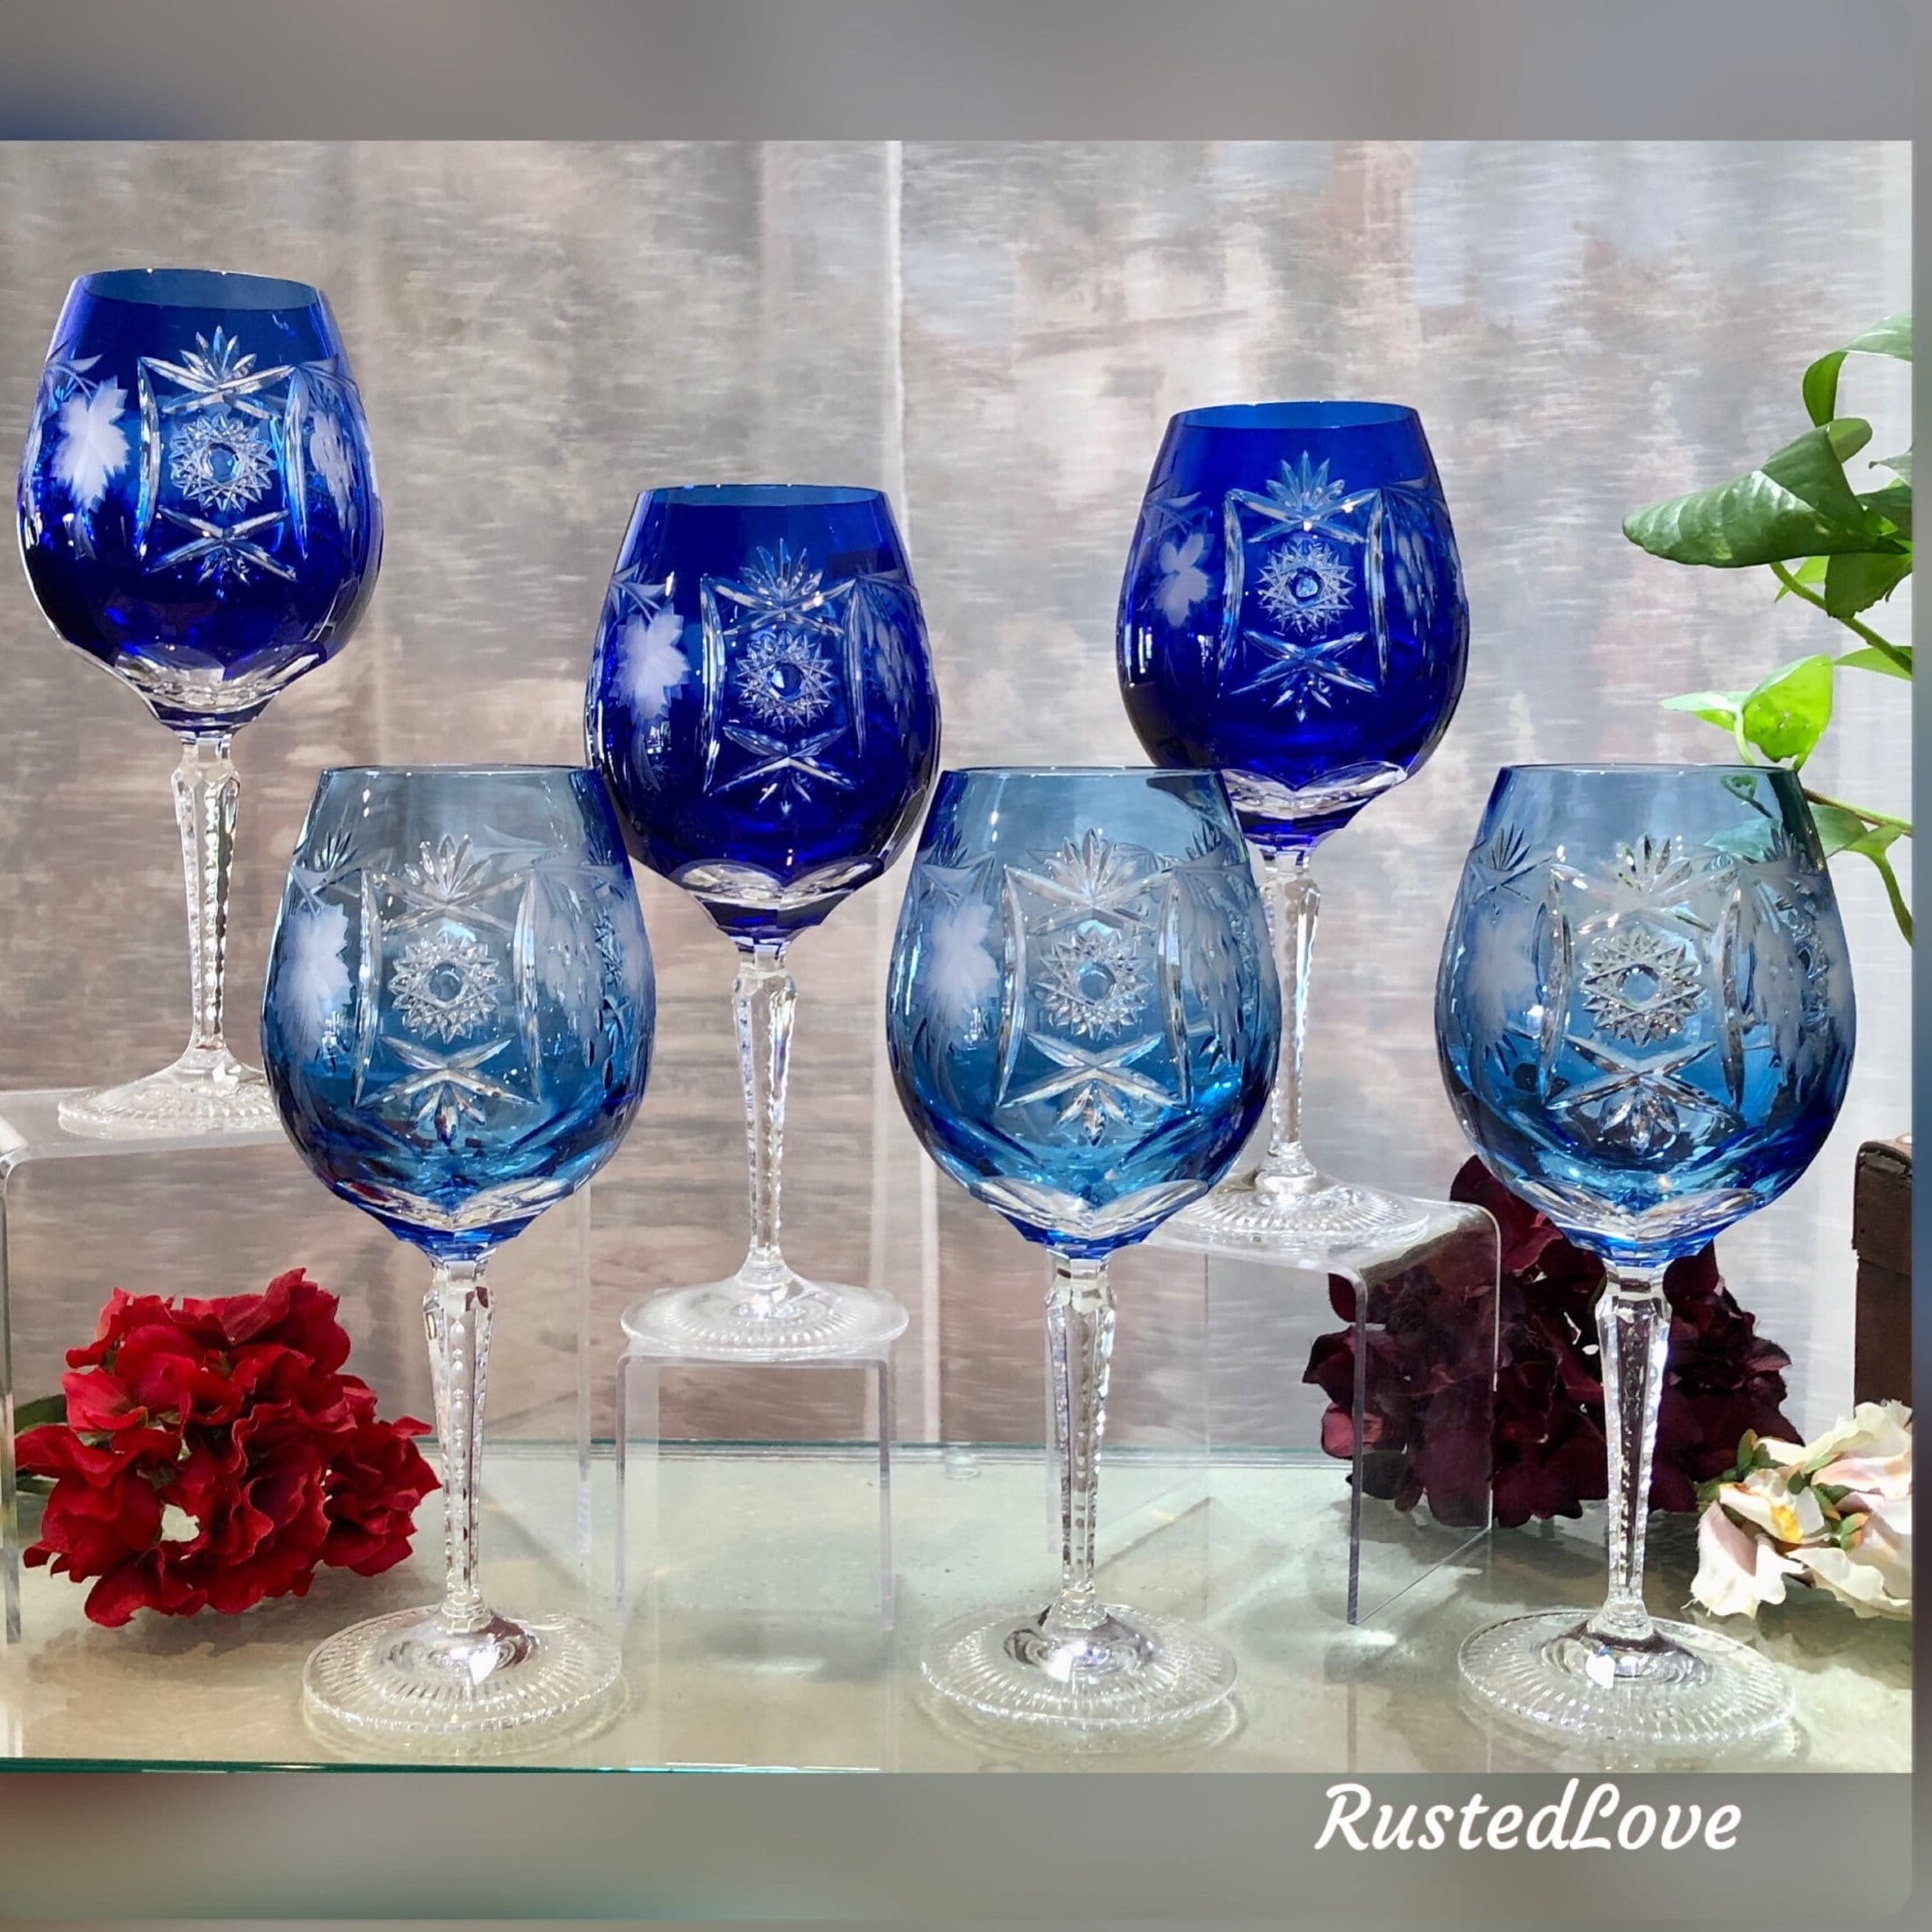 Wine Glasses With Bunch of Grapes Figure, Balloon Glass, Balloon Wine, Wine  Goblet, Large Glasses, Red Wine Glasses With Stem, Glassware Set -   Denmark